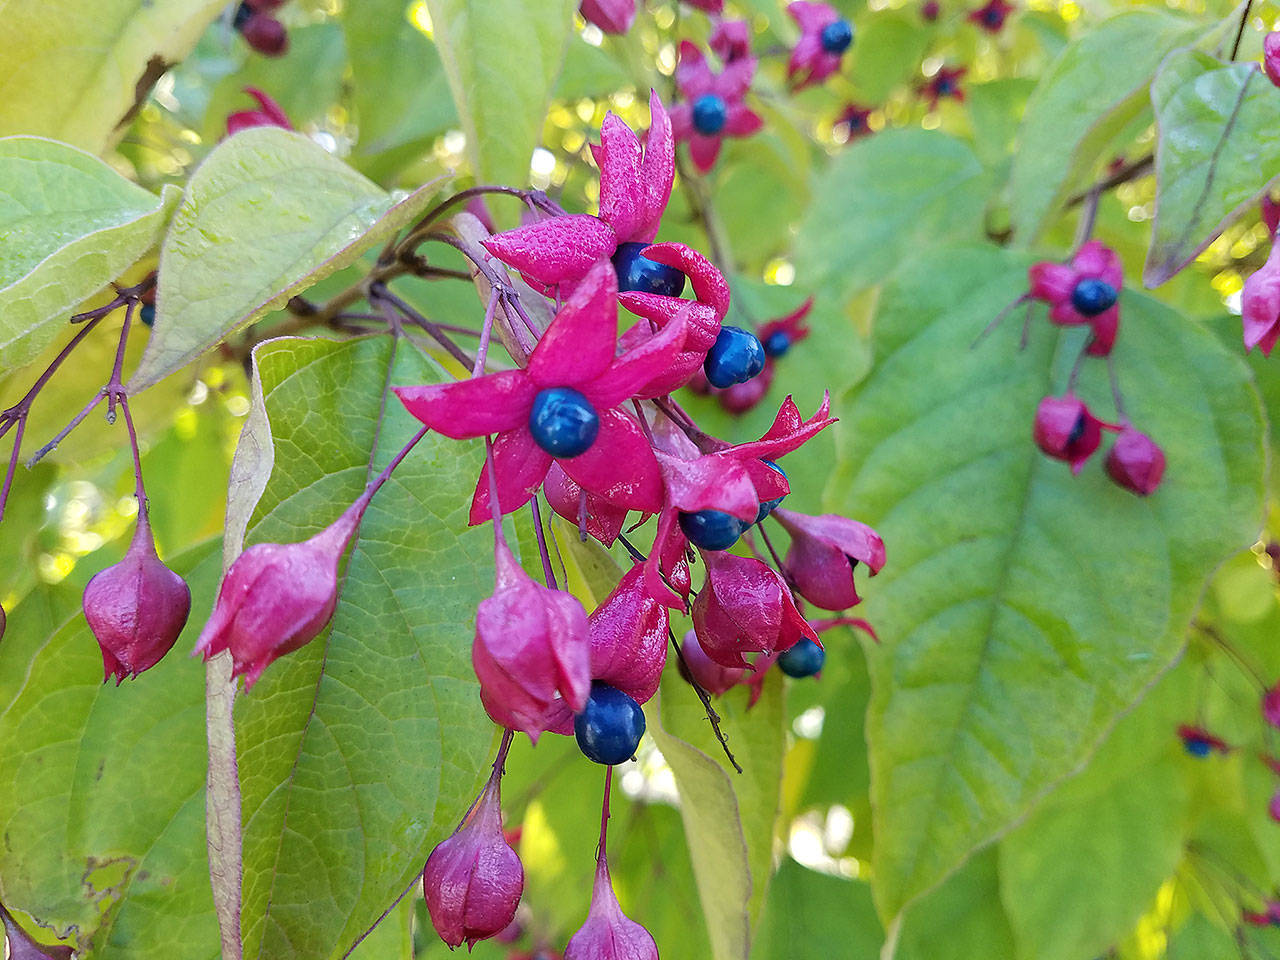 Harlequin glorybower’s blue berries in autumn are accented by bright, pinkish-red calyxes. (Sandra Schumacher)